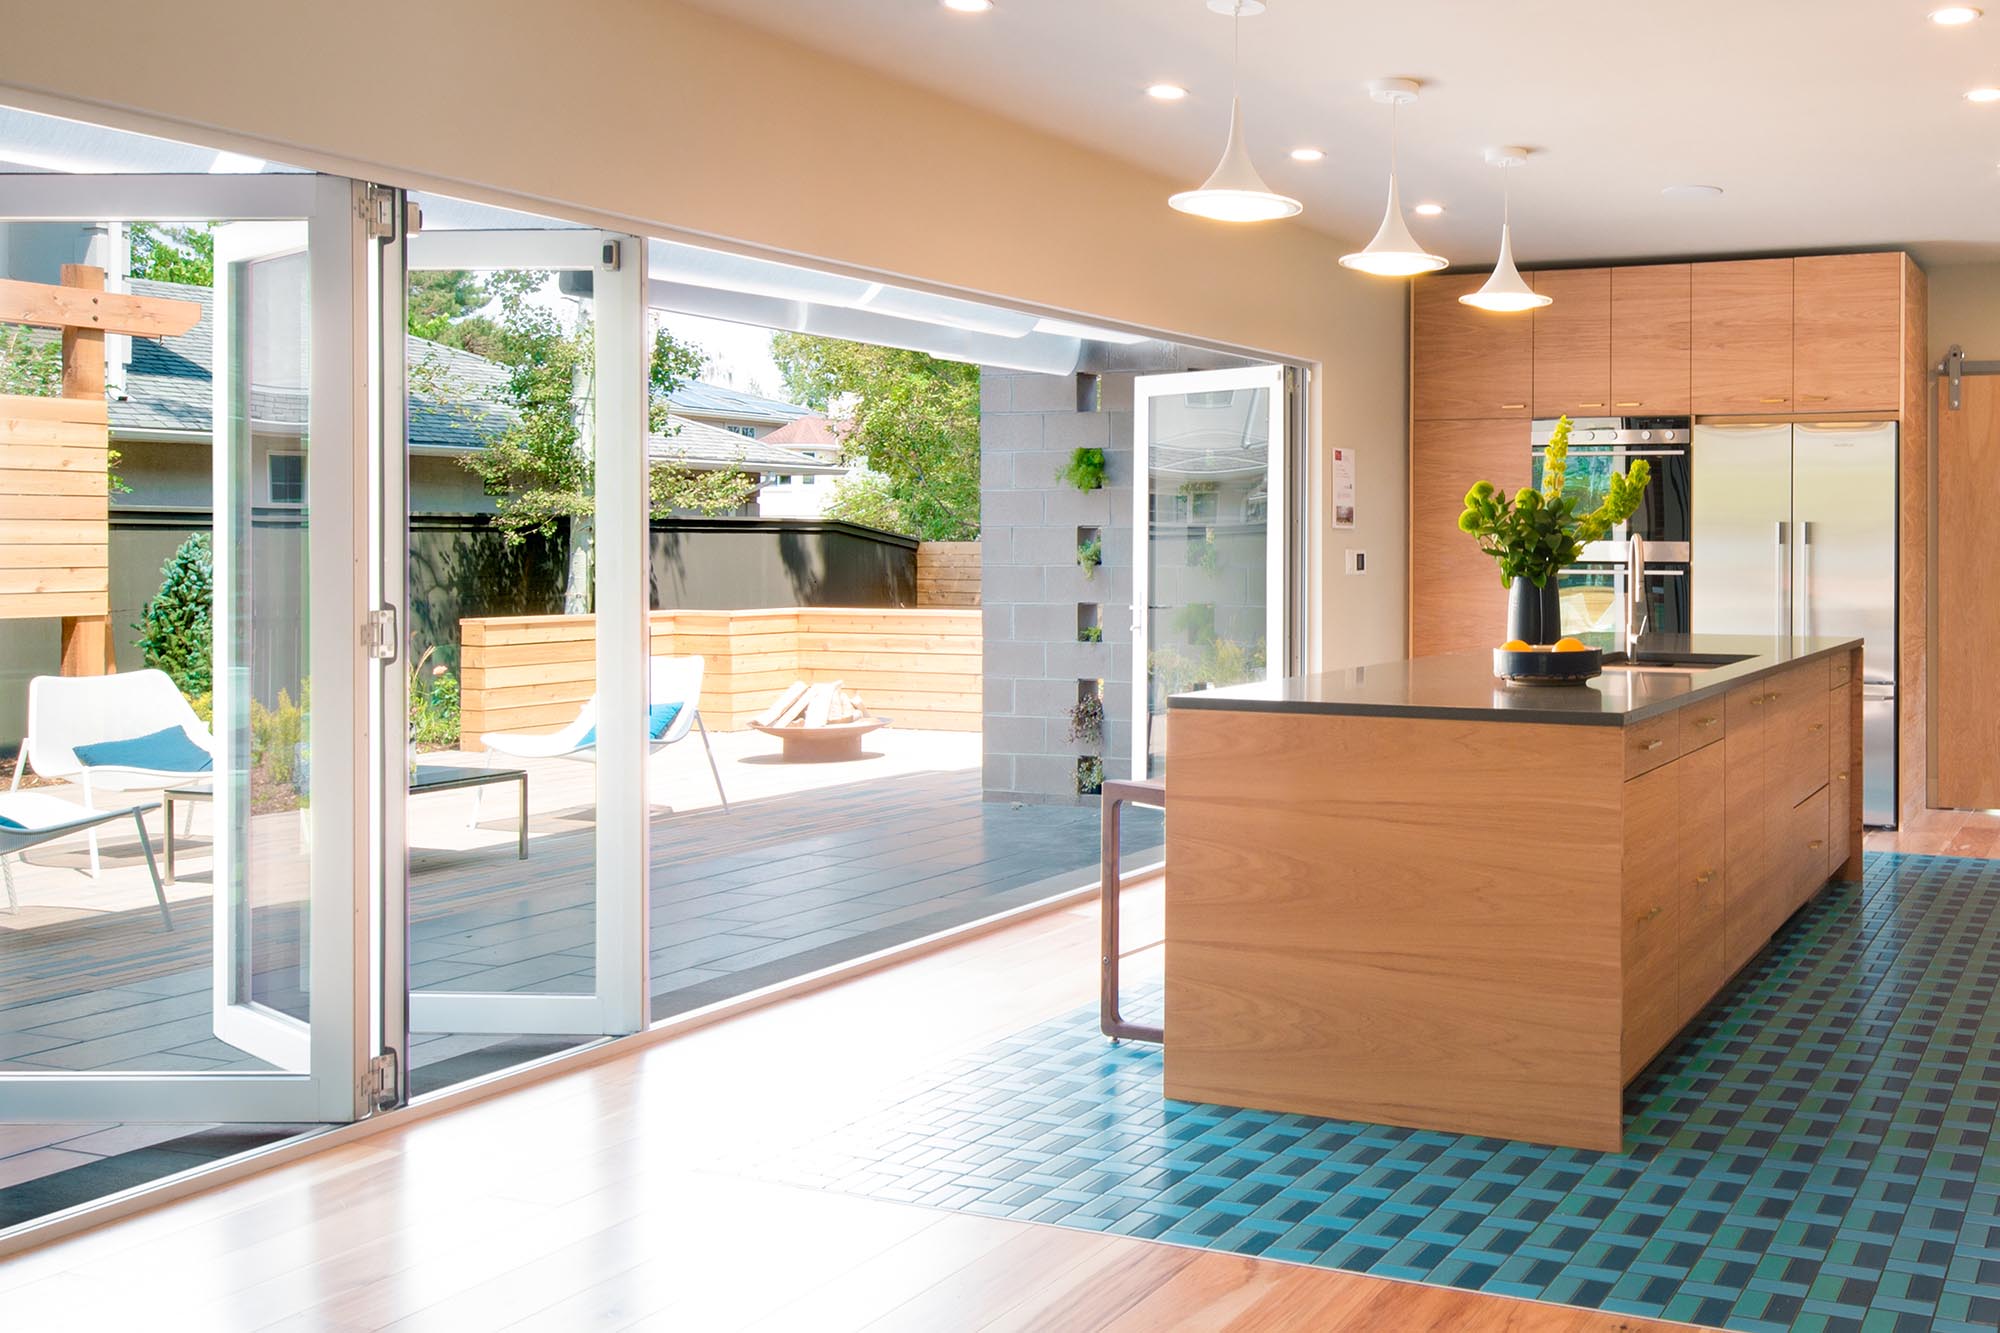 A wall length bi-fold door opens to connect the kitchen to the patio seating area.